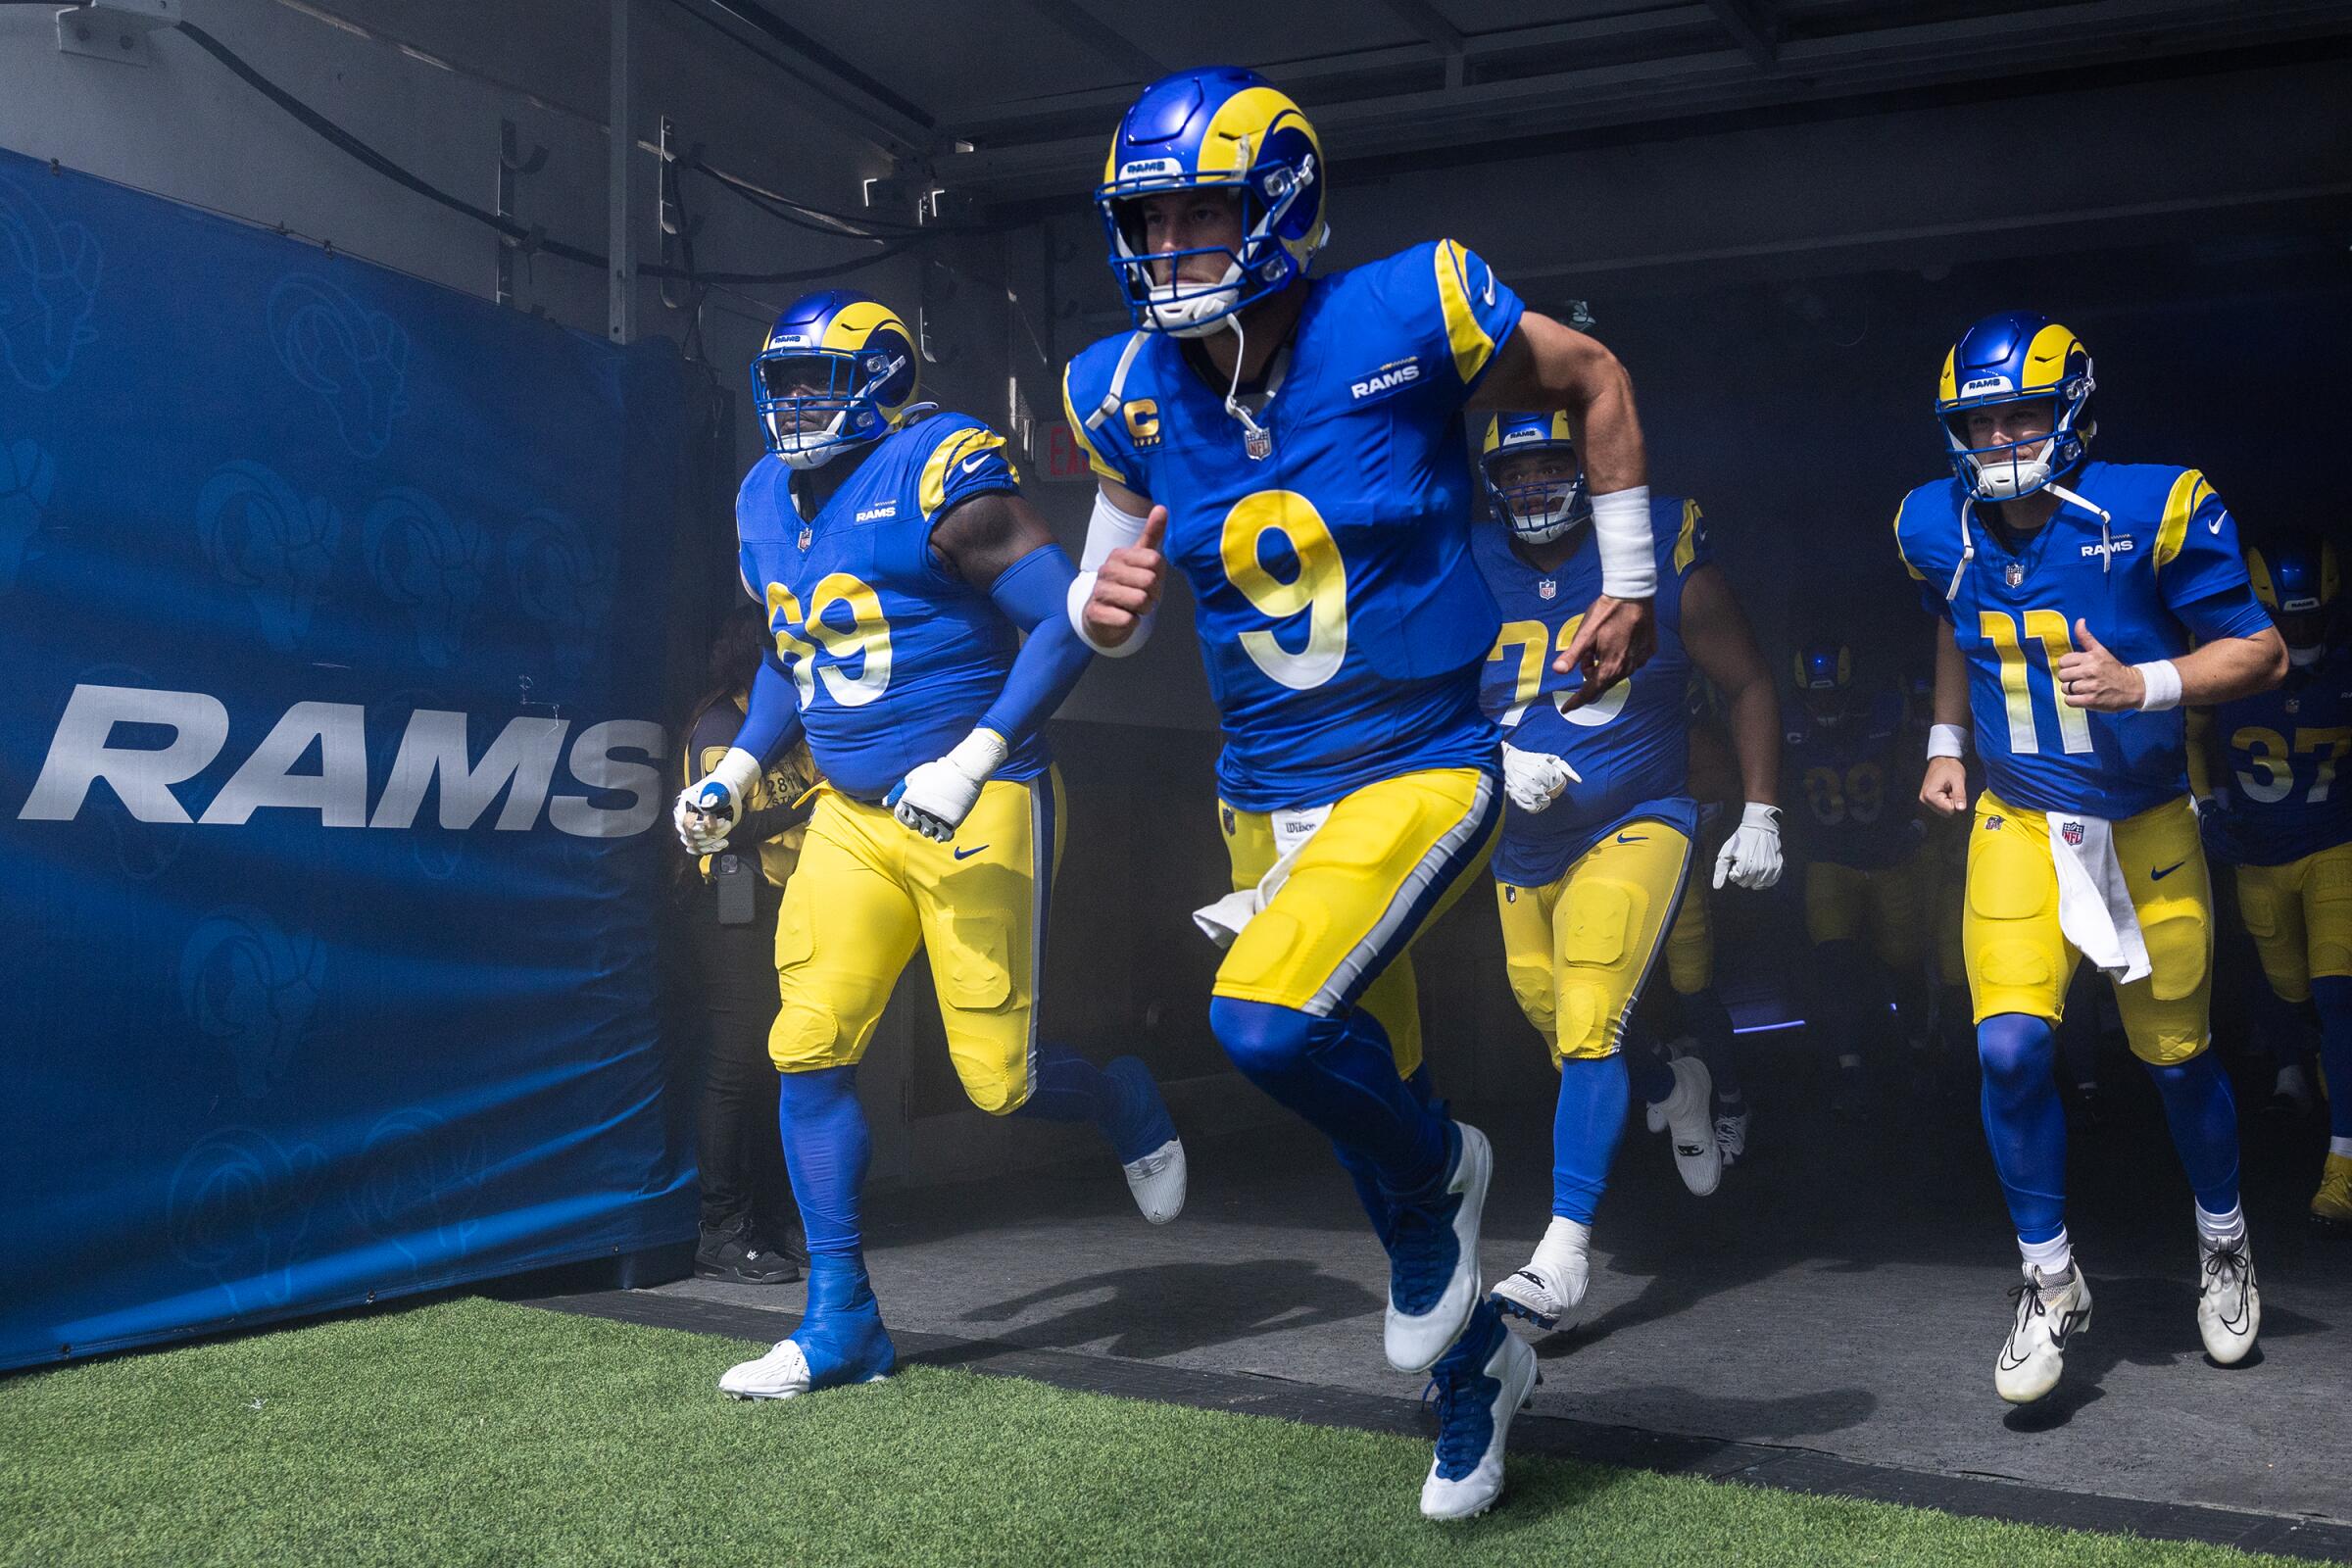 Quarterback Matthew Stafford leads the Rams out of the SoFi Stadium tunnel onto the field.